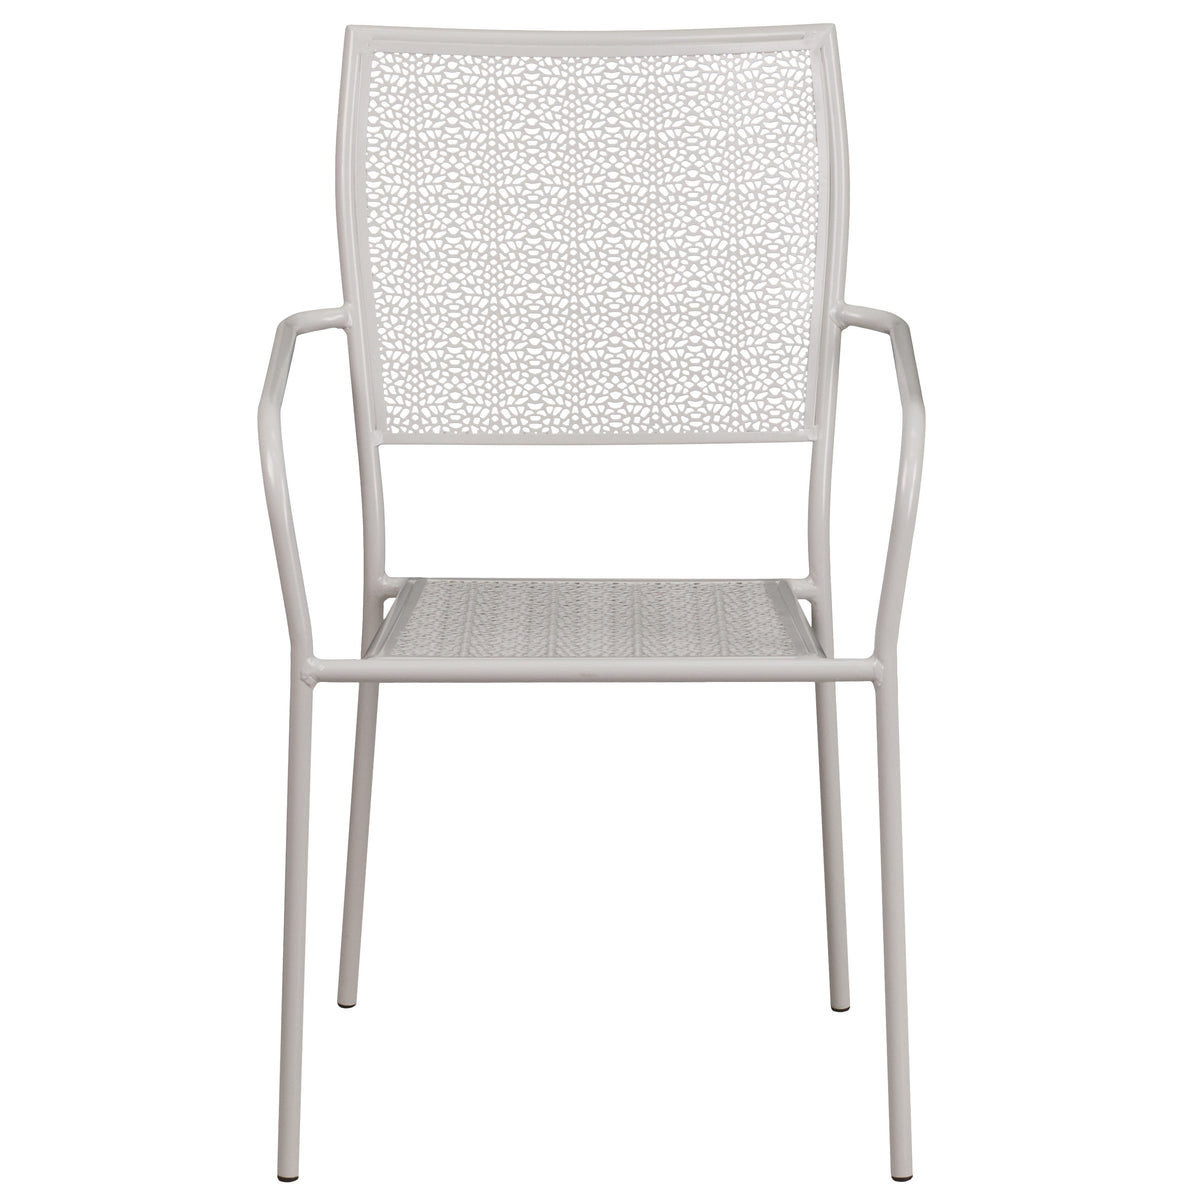 Light Gray |#| Light Gray Indoor-Outdoor Steel Patio Arm Chair with Square Back - Bistro Chair